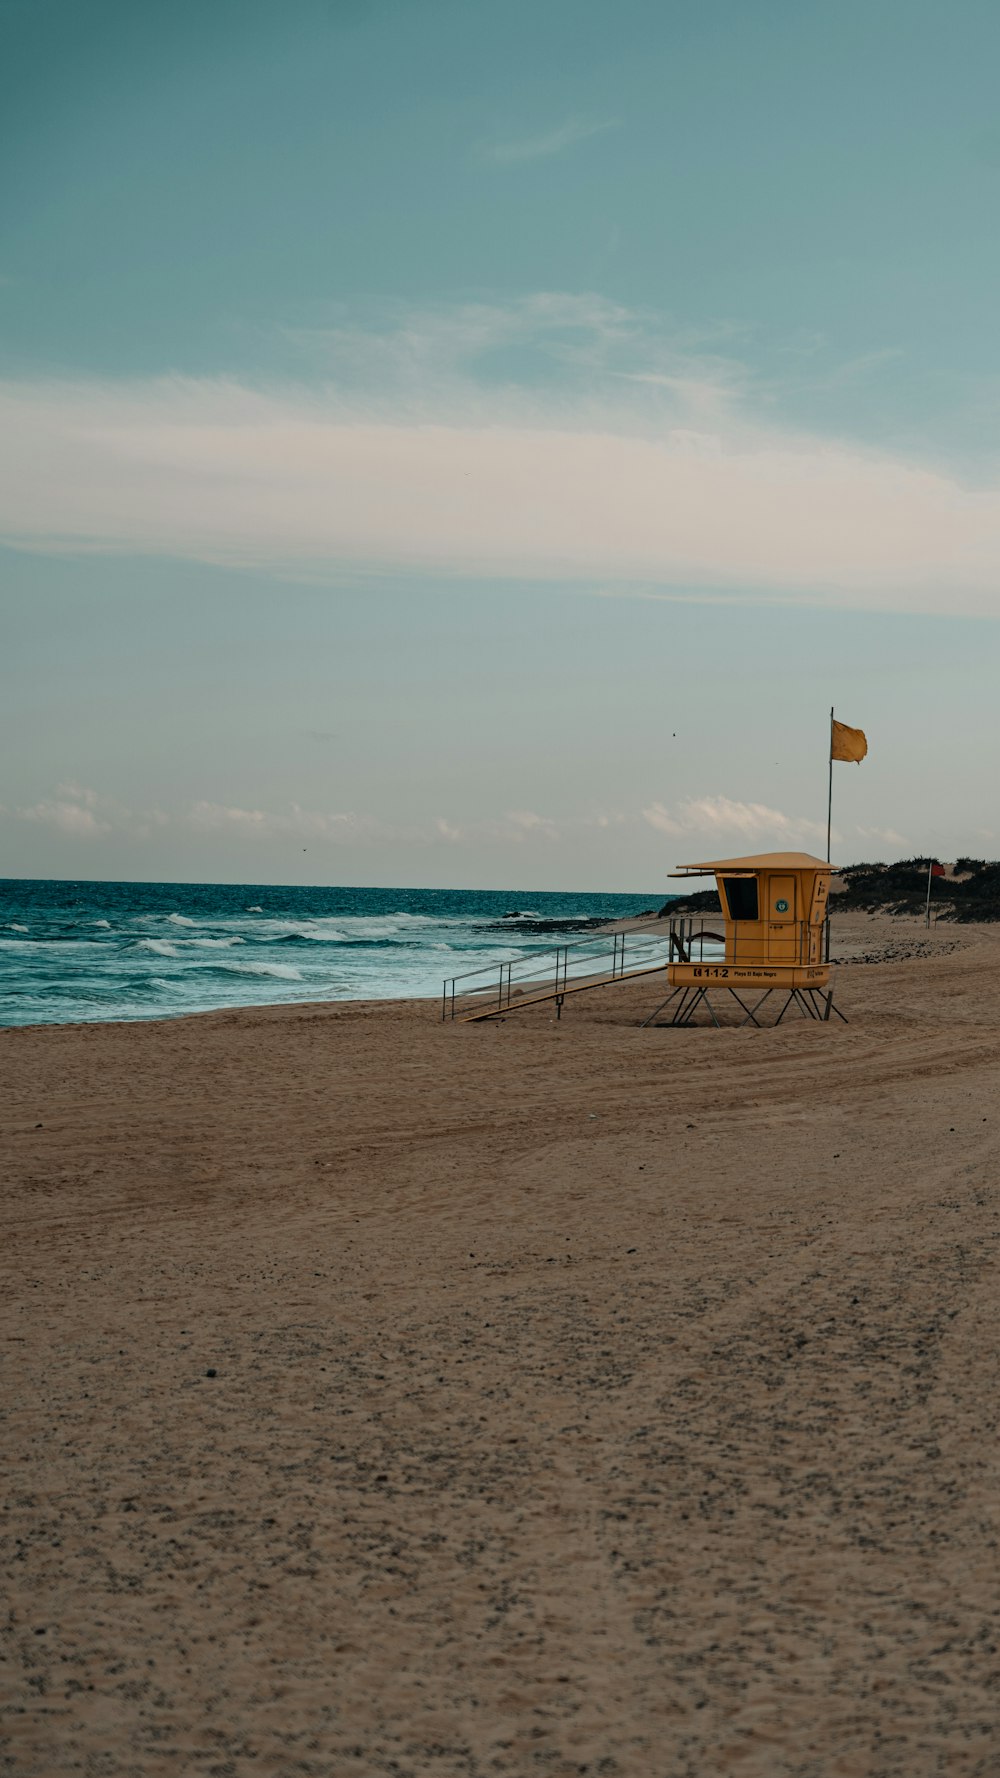 a lifeguard station on the beach with a flag flying